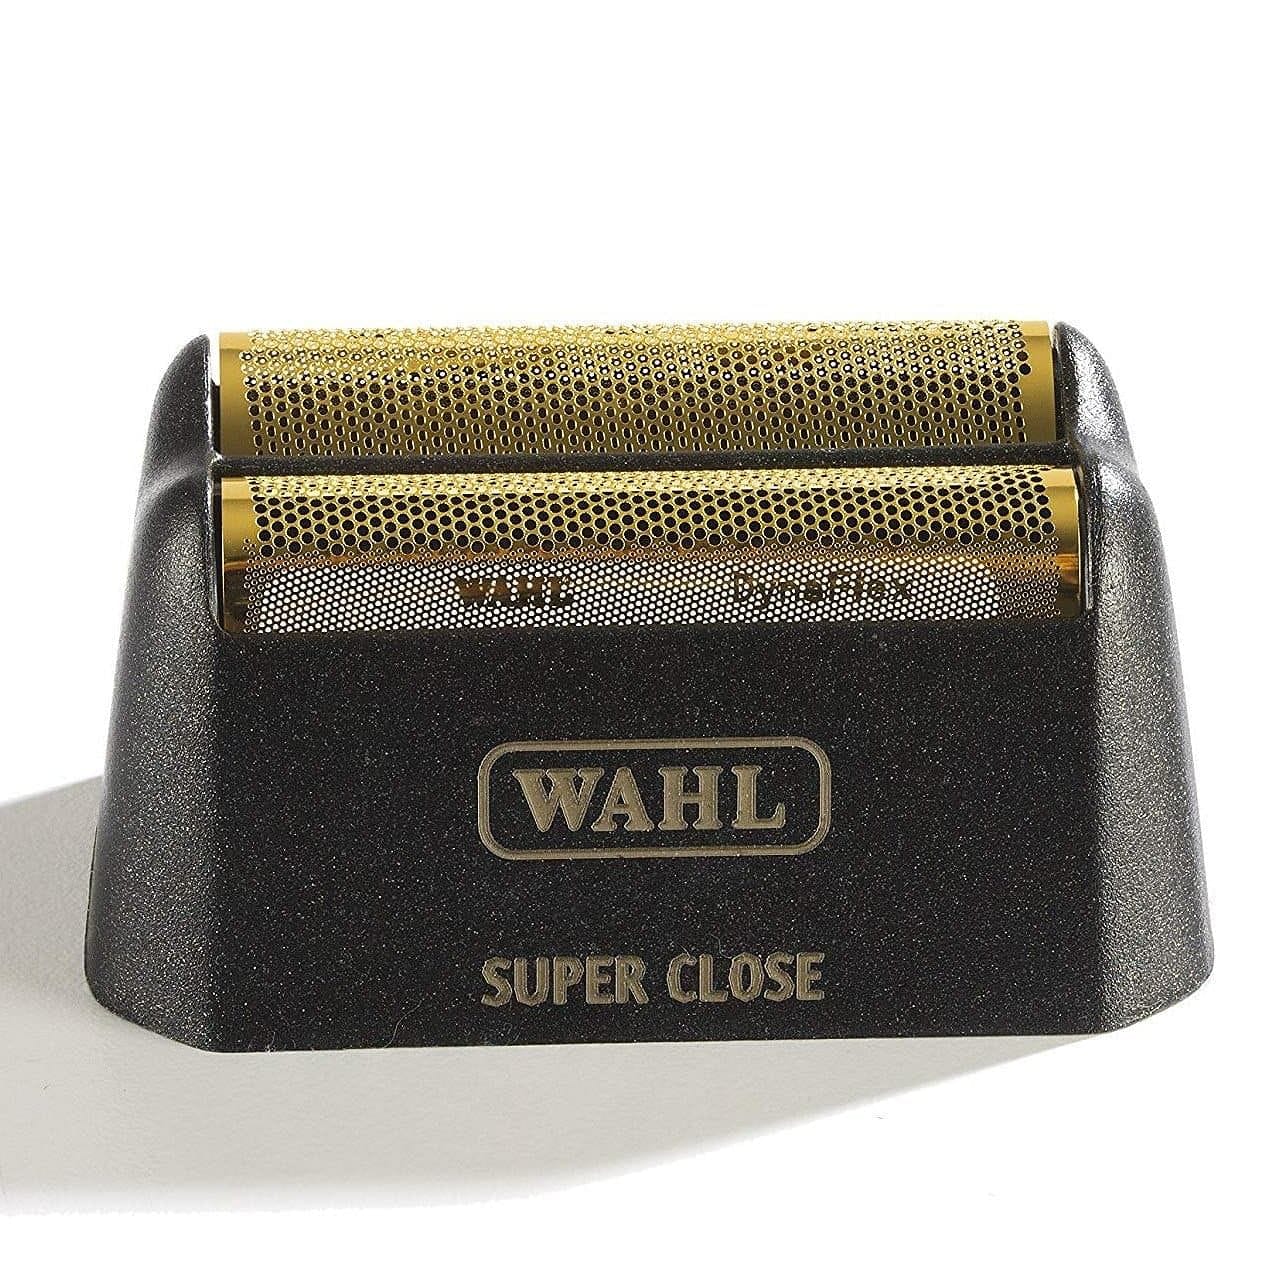 Wahl 5 Star Finale Super Close Replacement Foil & Cutter Bar Assembly - Gold #7043 - Goldy TV